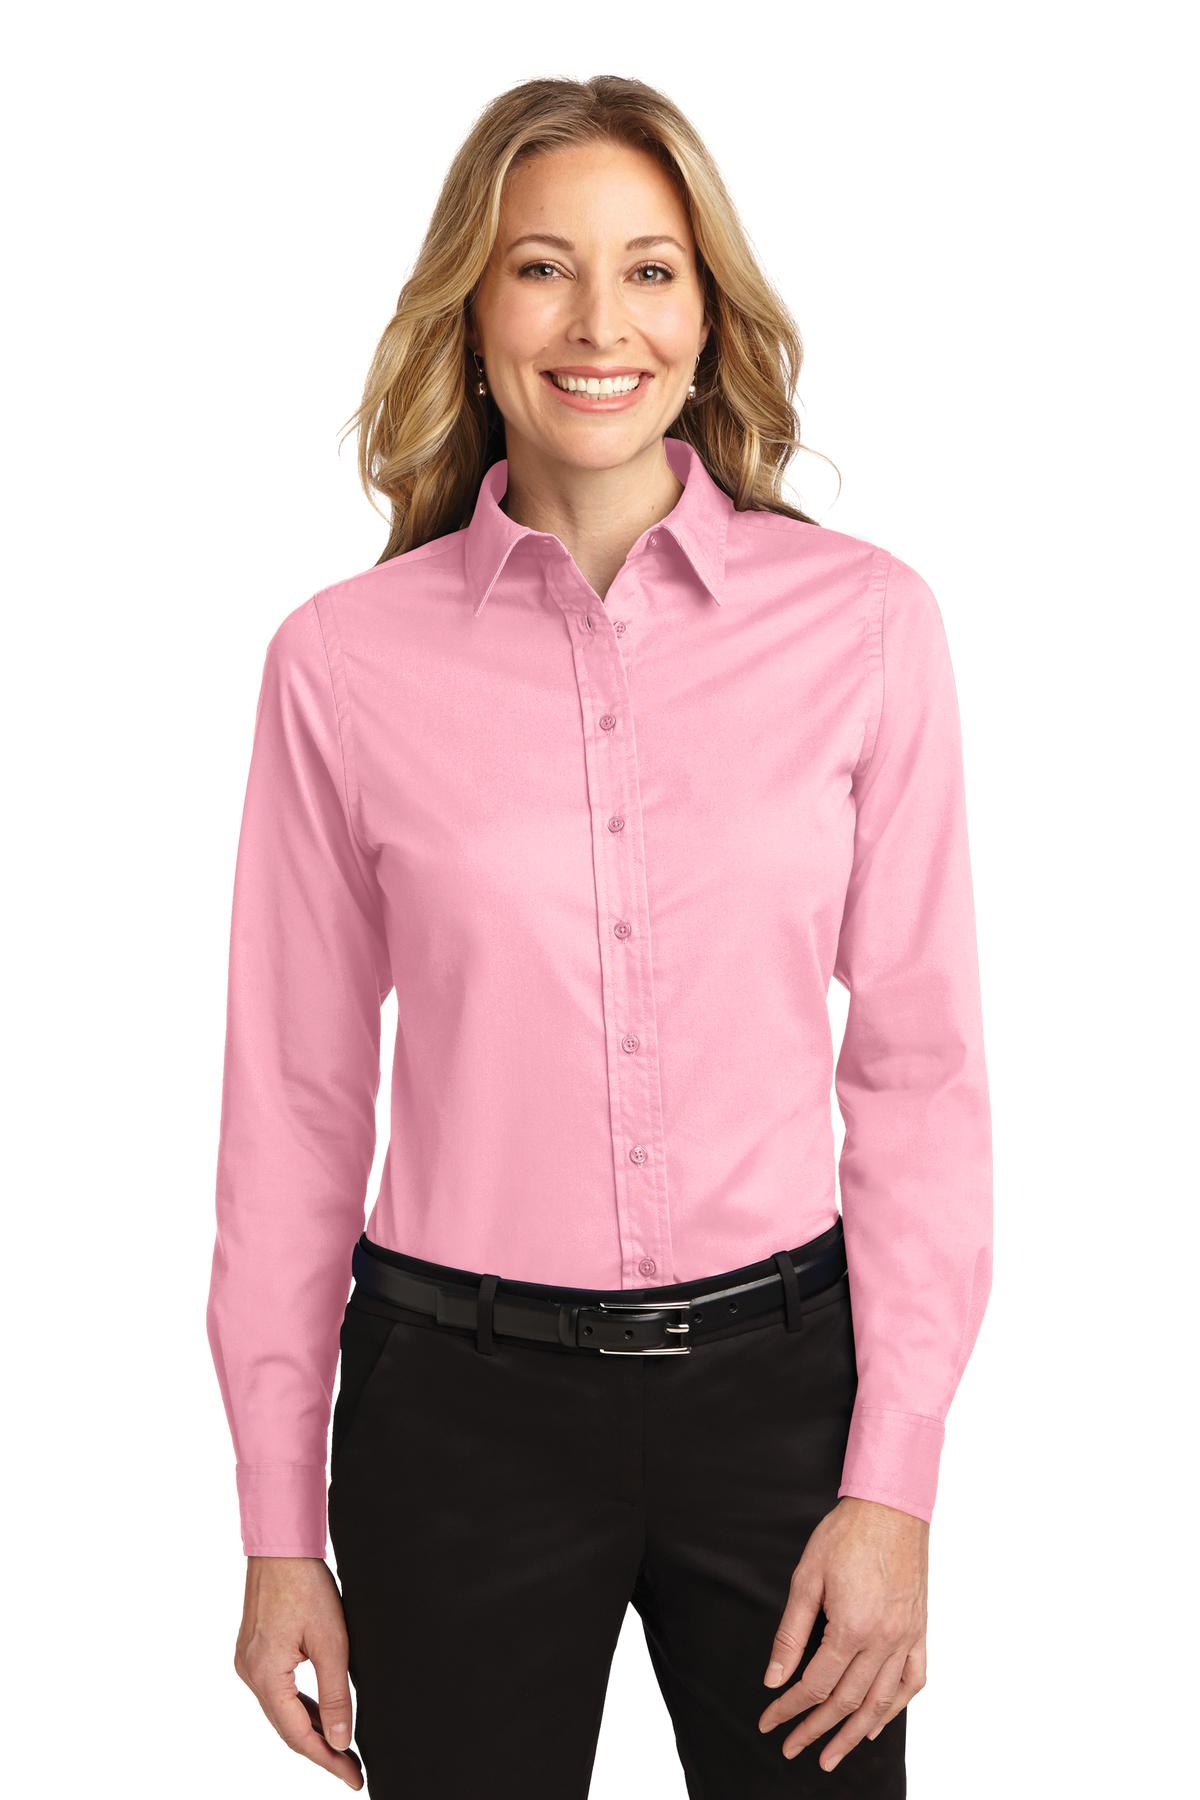 L608 Authority Womens Long Sleeve Button Down Easy Care | eBay